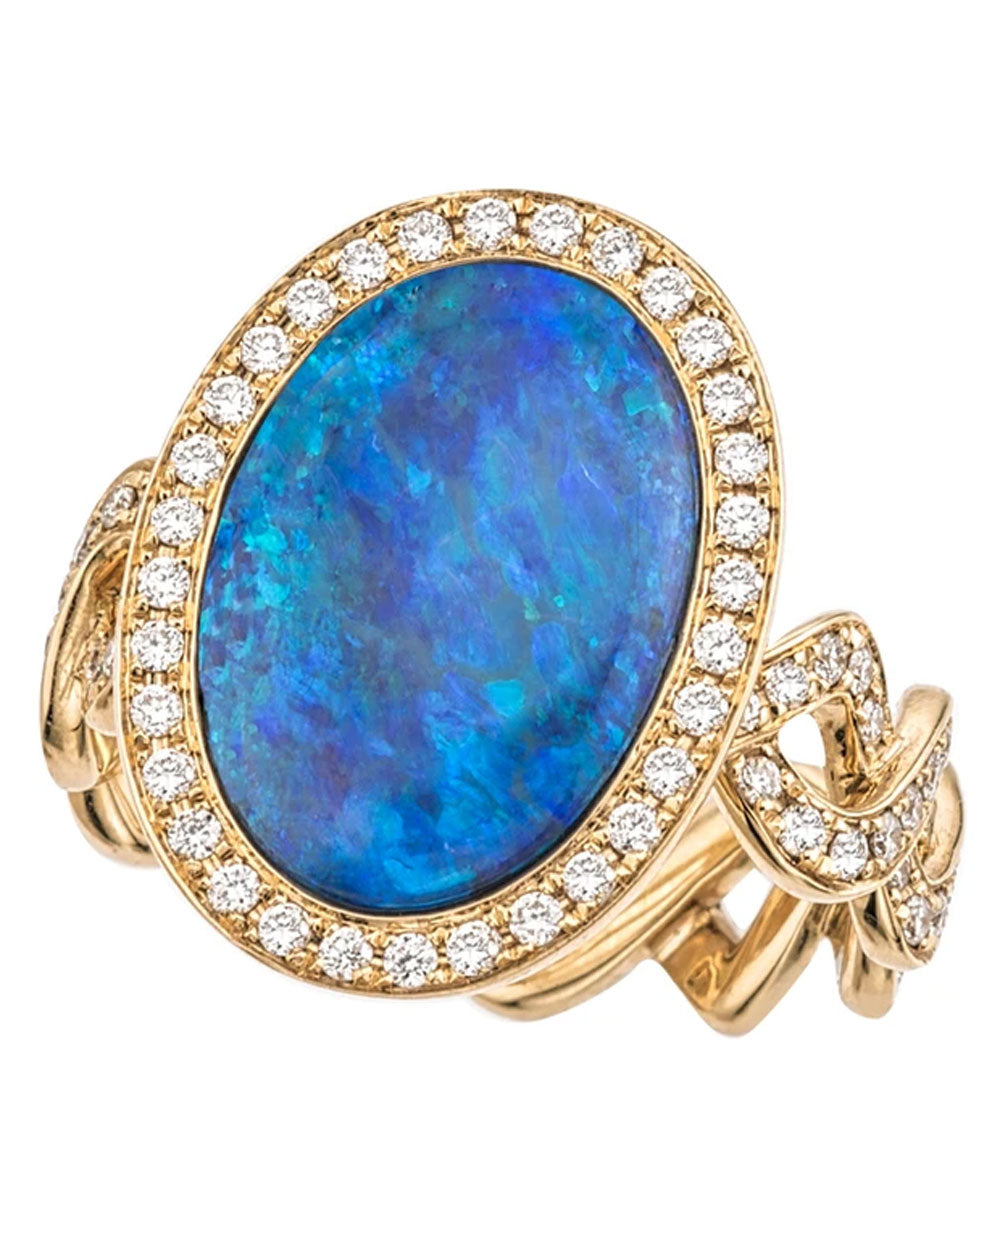 Black Opal and Diamond Twisted Vine Ring